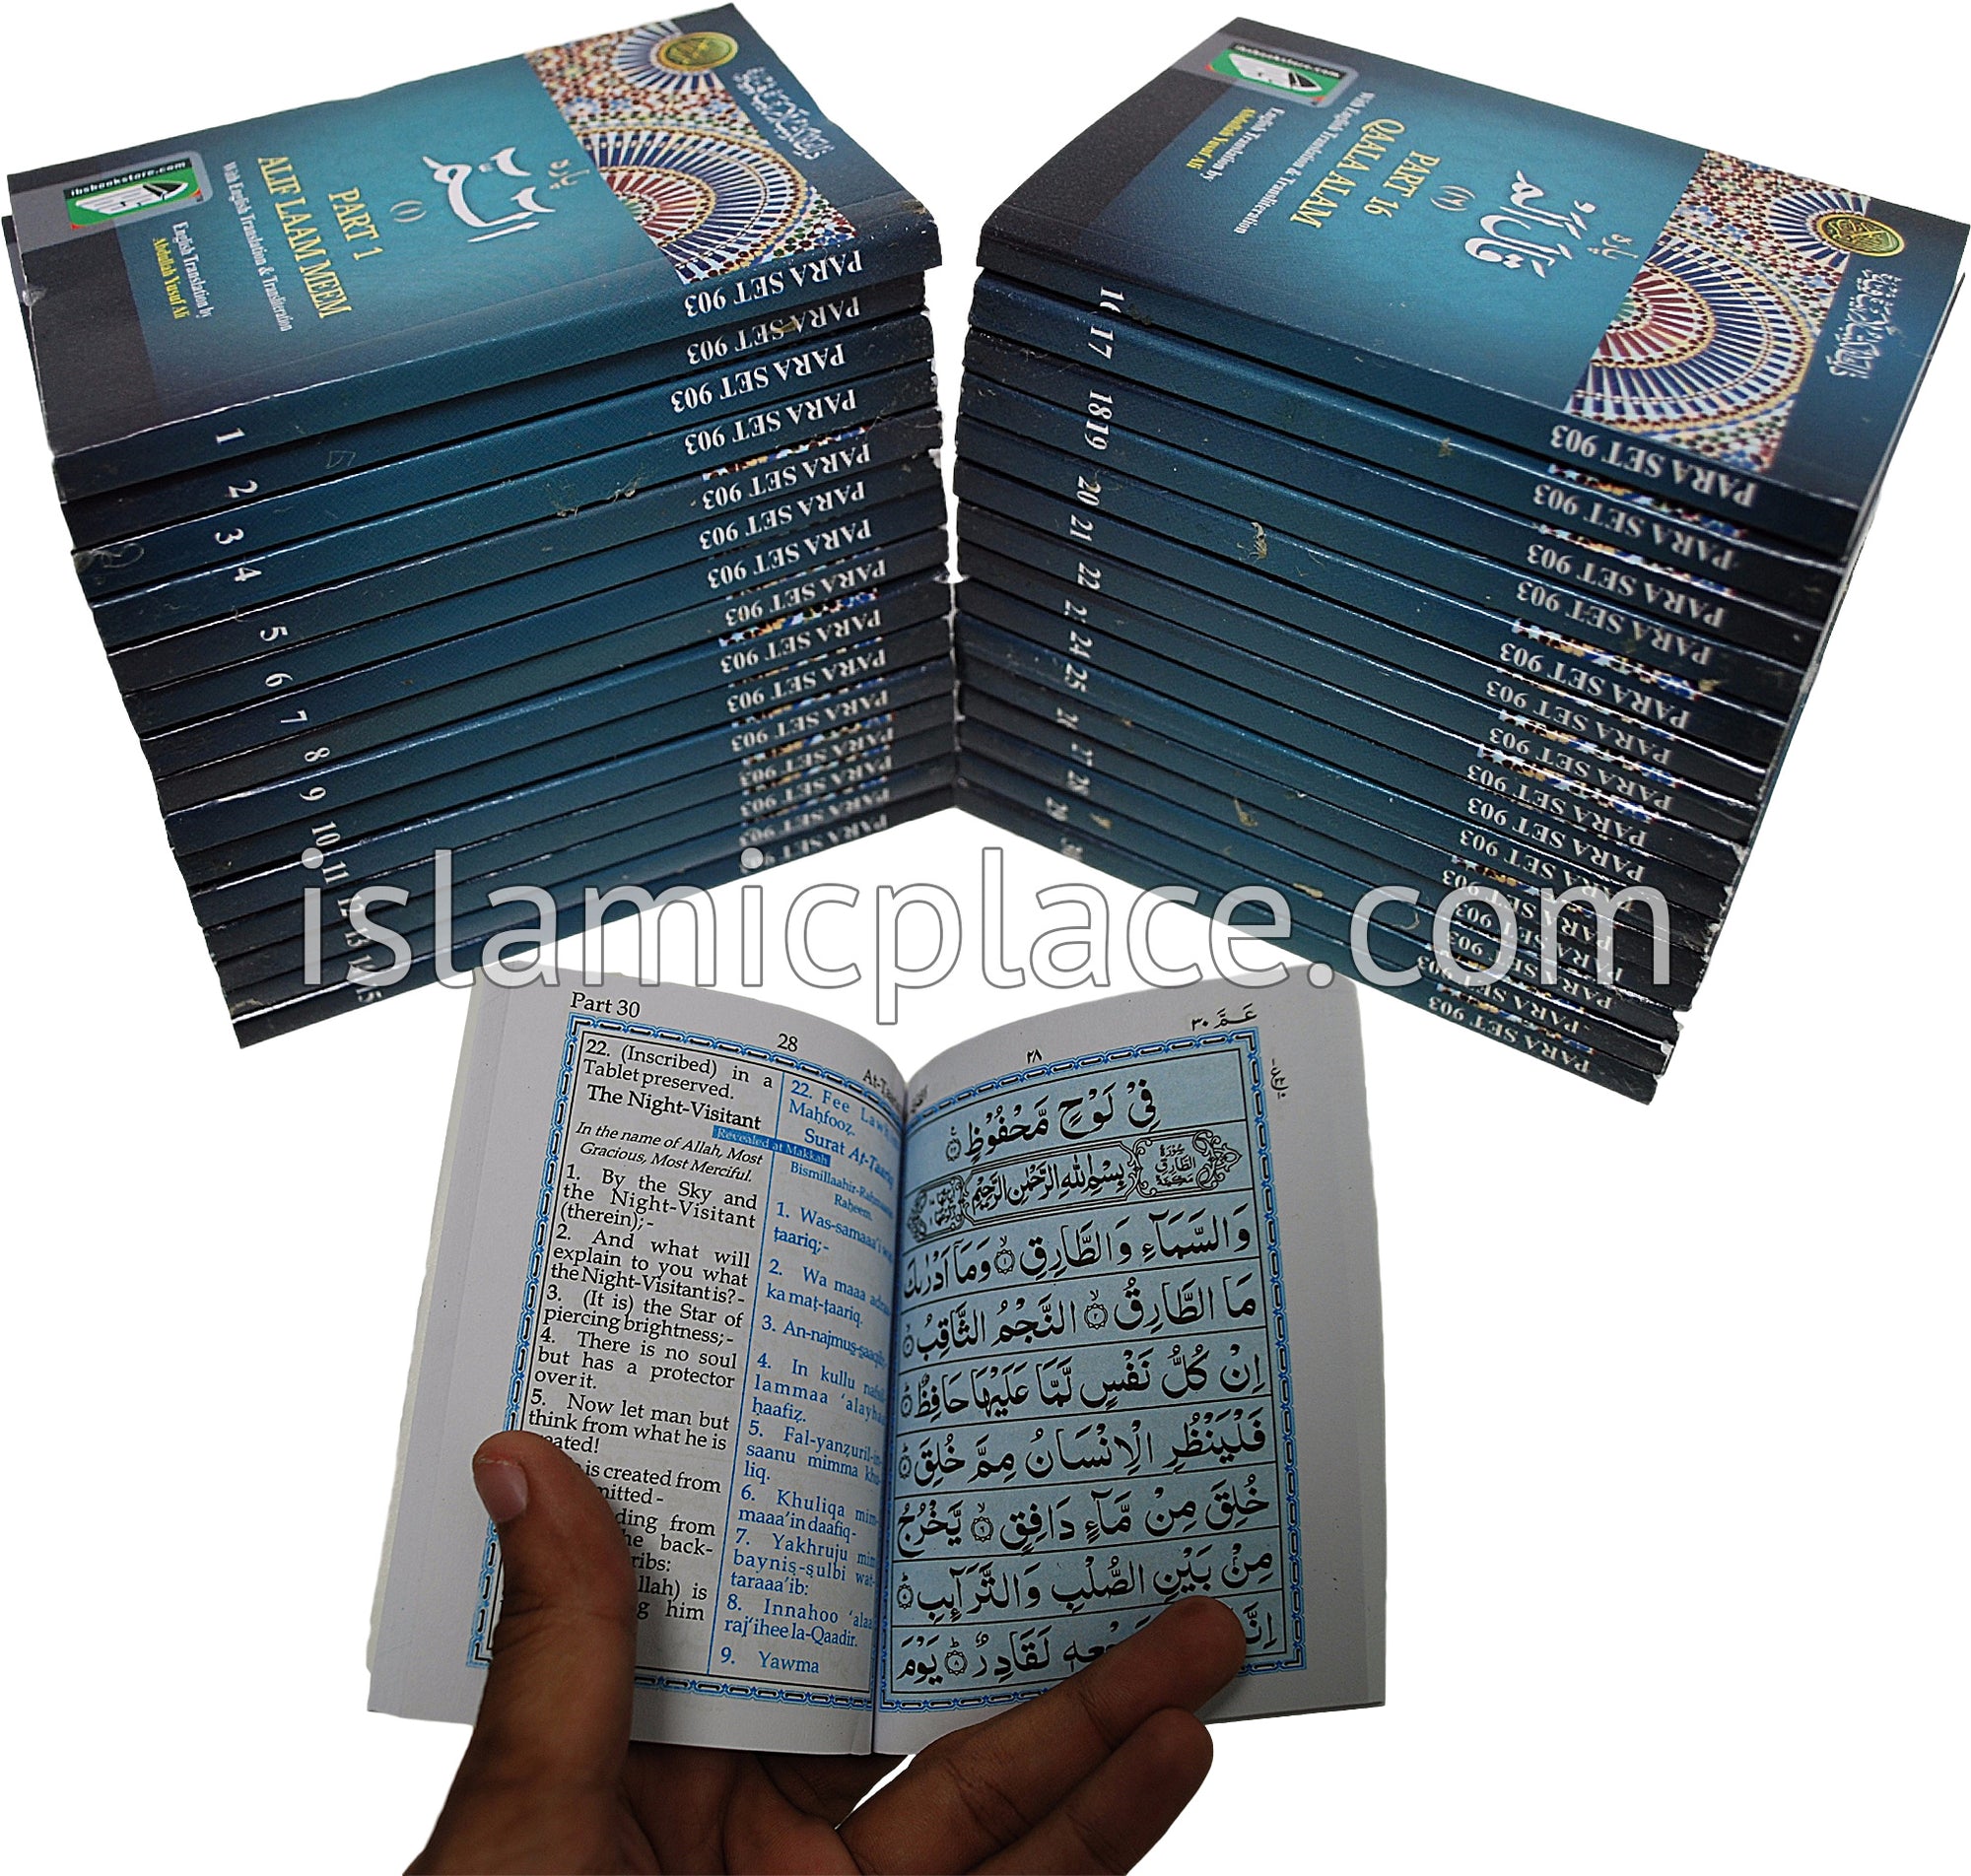 [30 vol set] Quran in Pocket size with Arabic, English & Transliteration (Ref# 903-1/30) (approx 3.5" x 5")